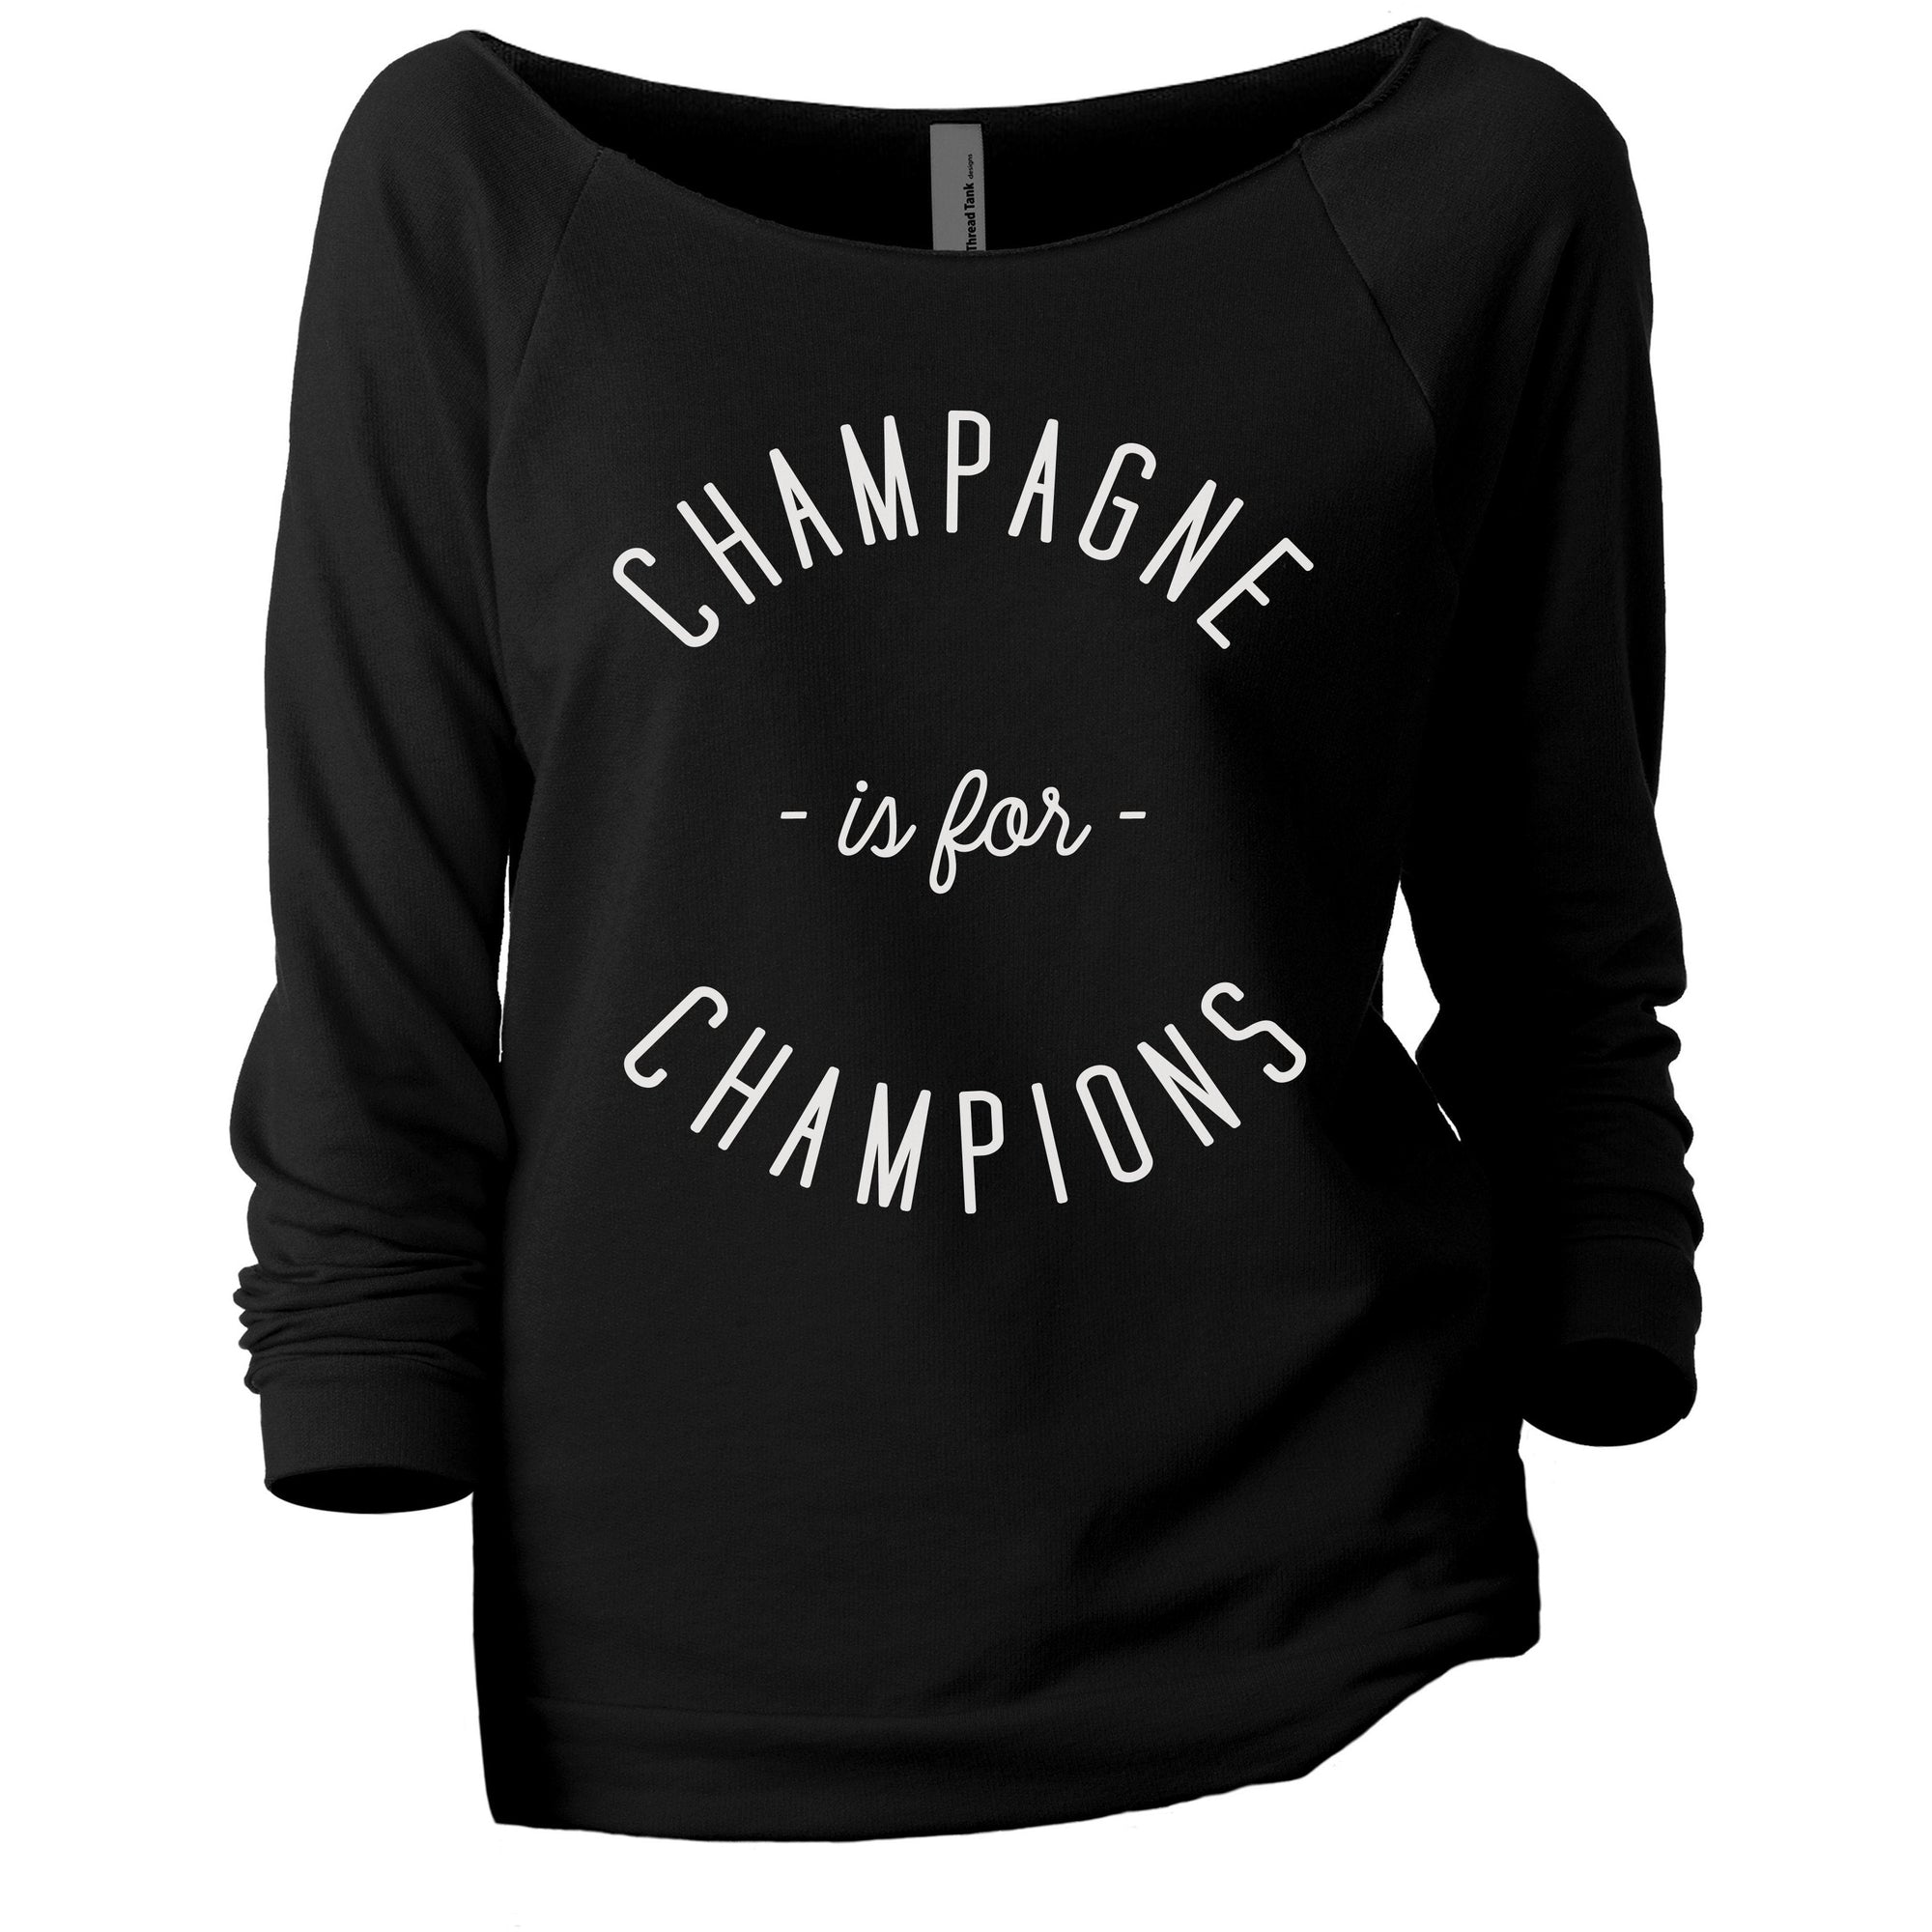 Champagne Is For Champions Women's Graphic Printed Lightweight Slouchy 3/4 Sleeves Sweatshirt Black